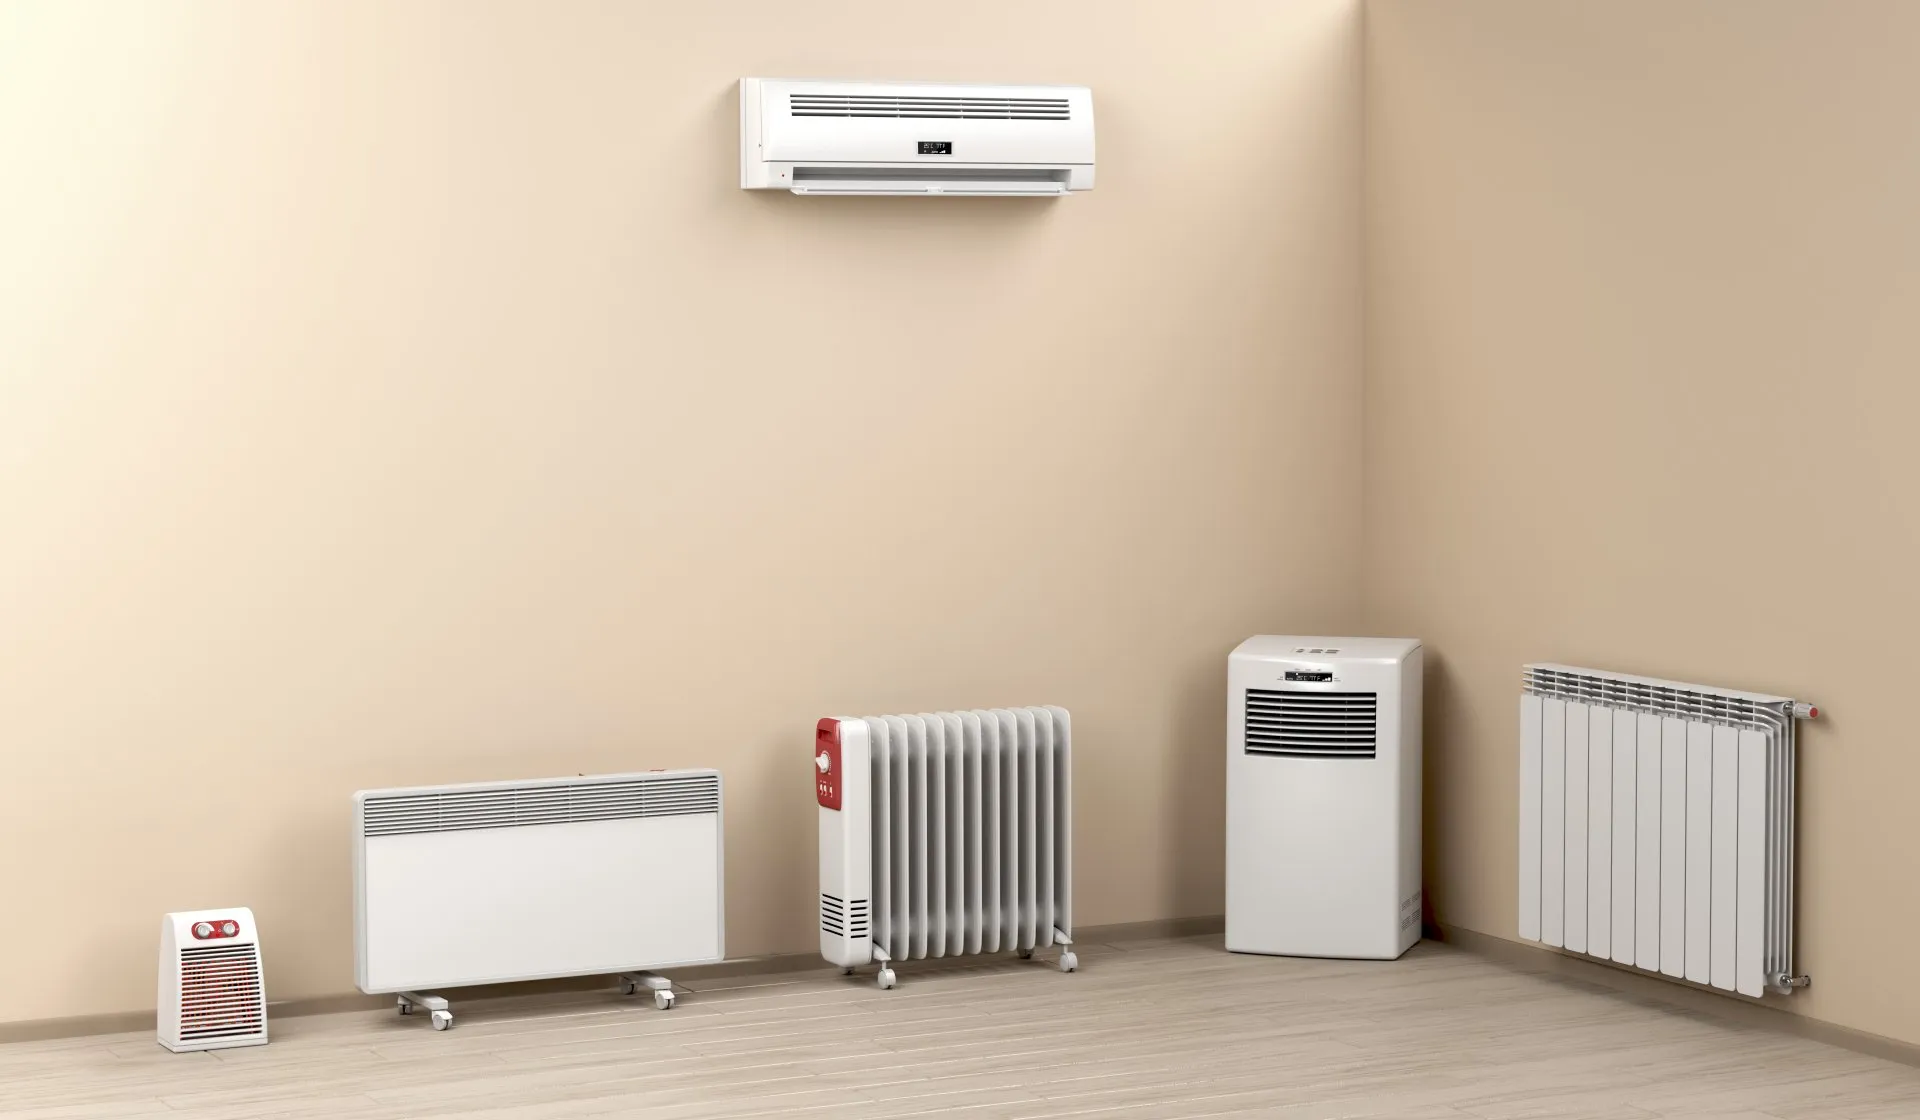 Which Heating System Is Better For Lung Problems: Forced Air Heating Vs Radiant Heating